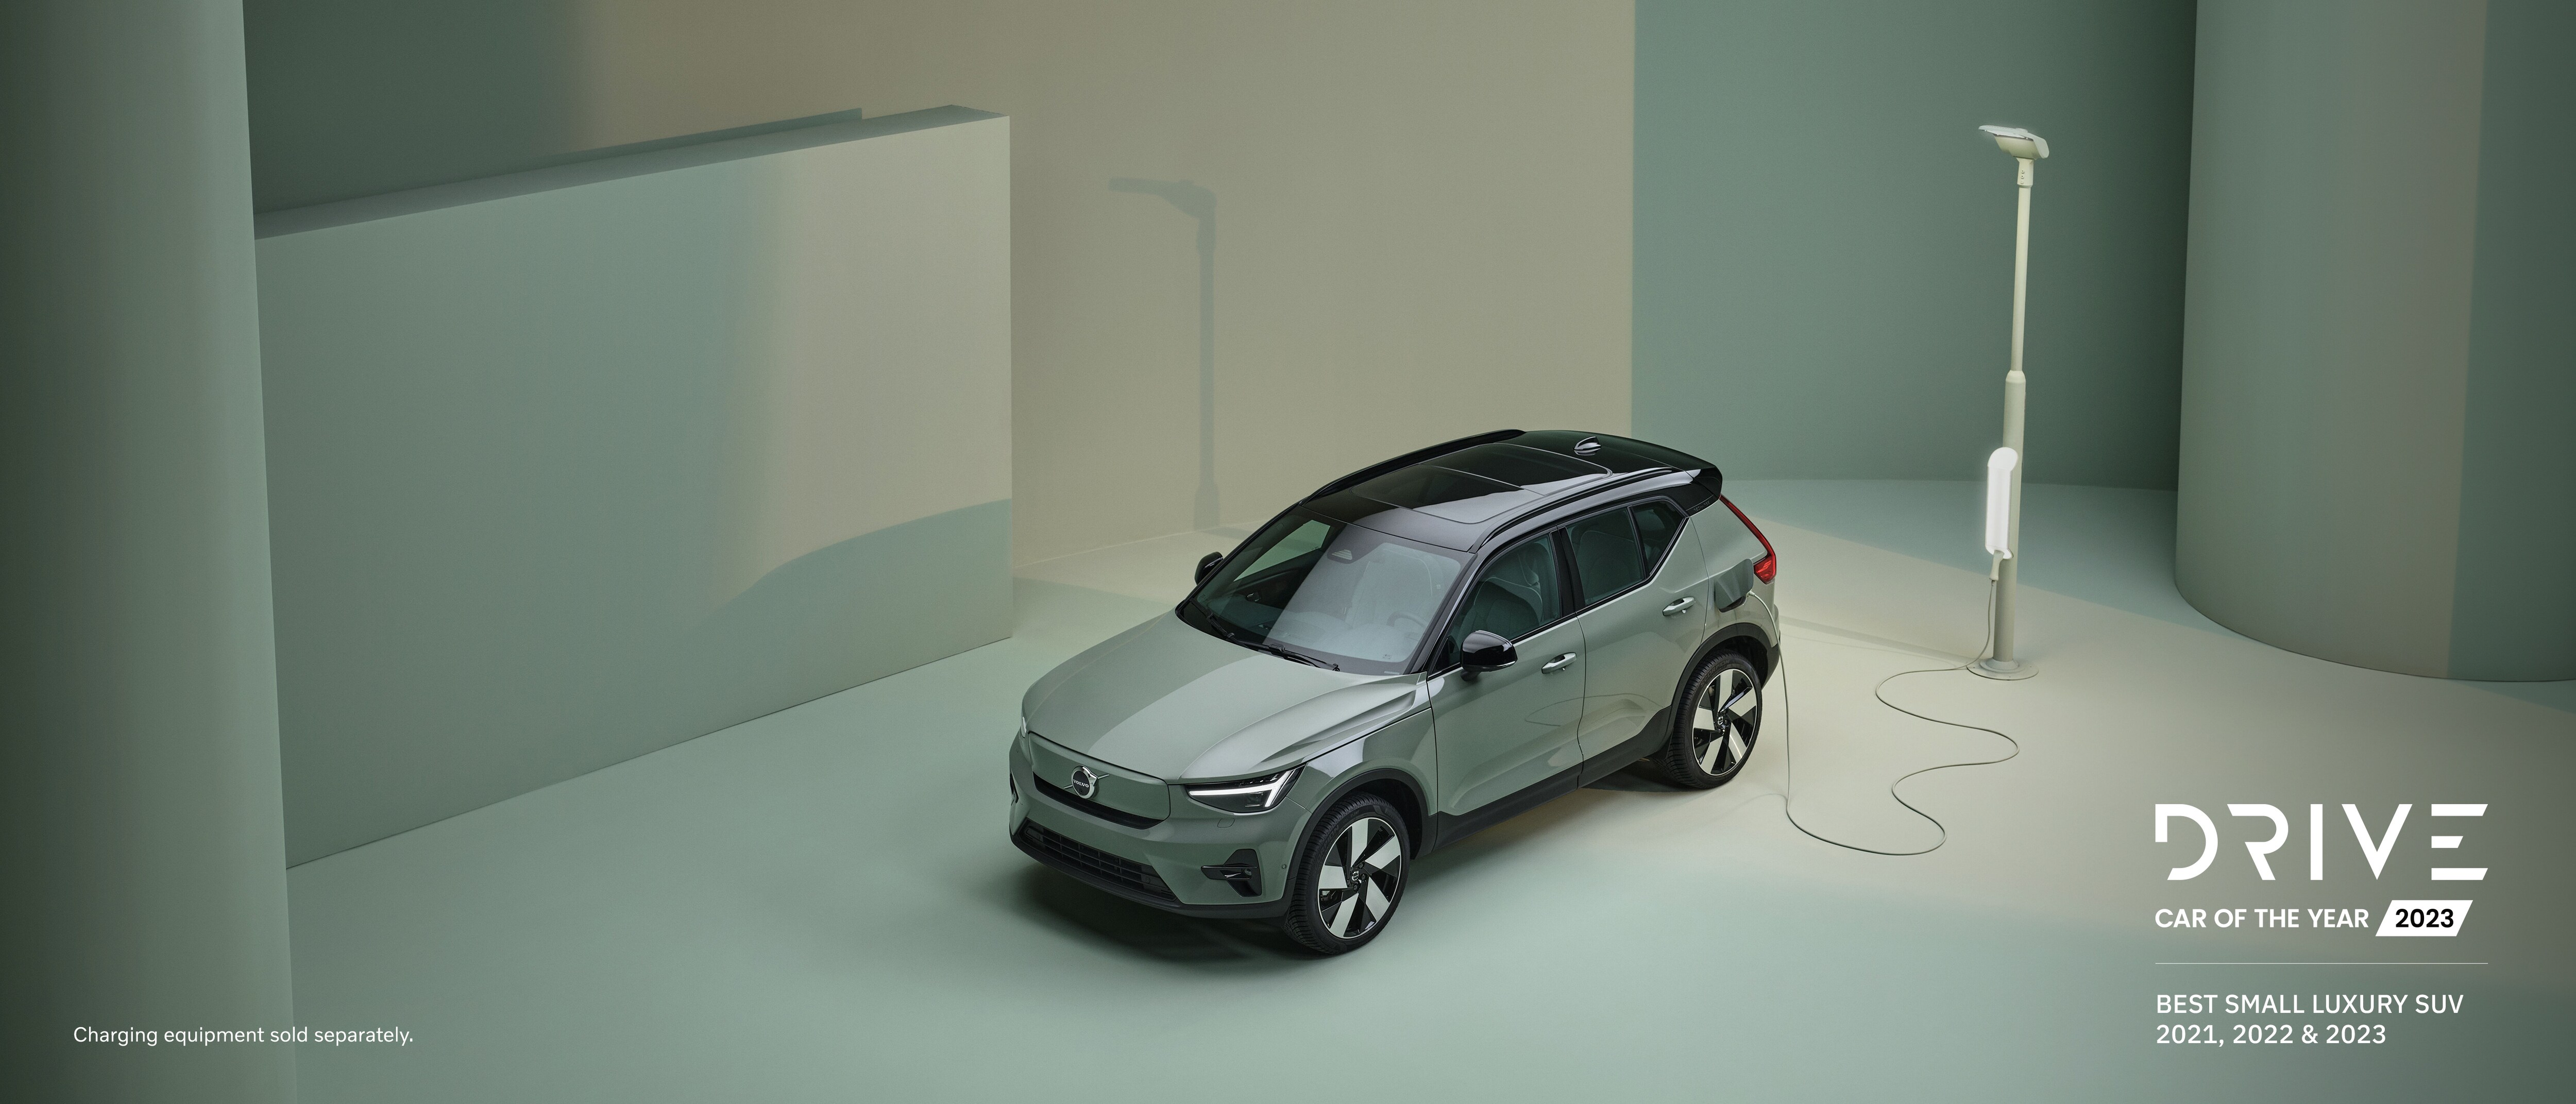 Volvo XC40 Drive Car of the Year